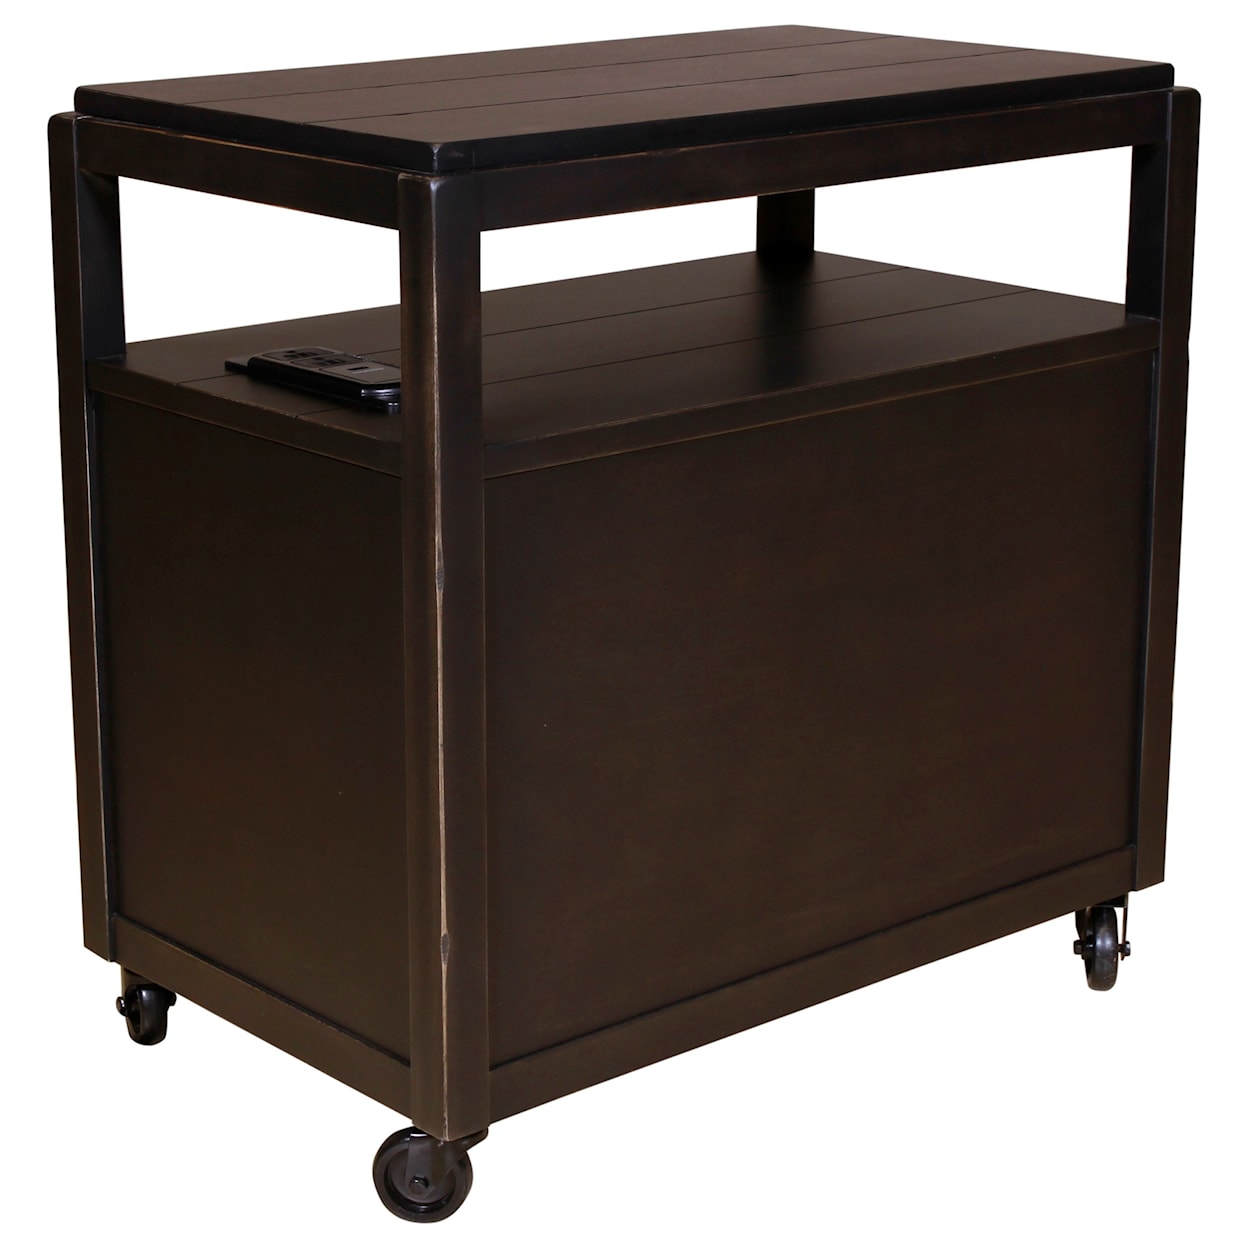 Hammary Marlowe Charging Chairside Table